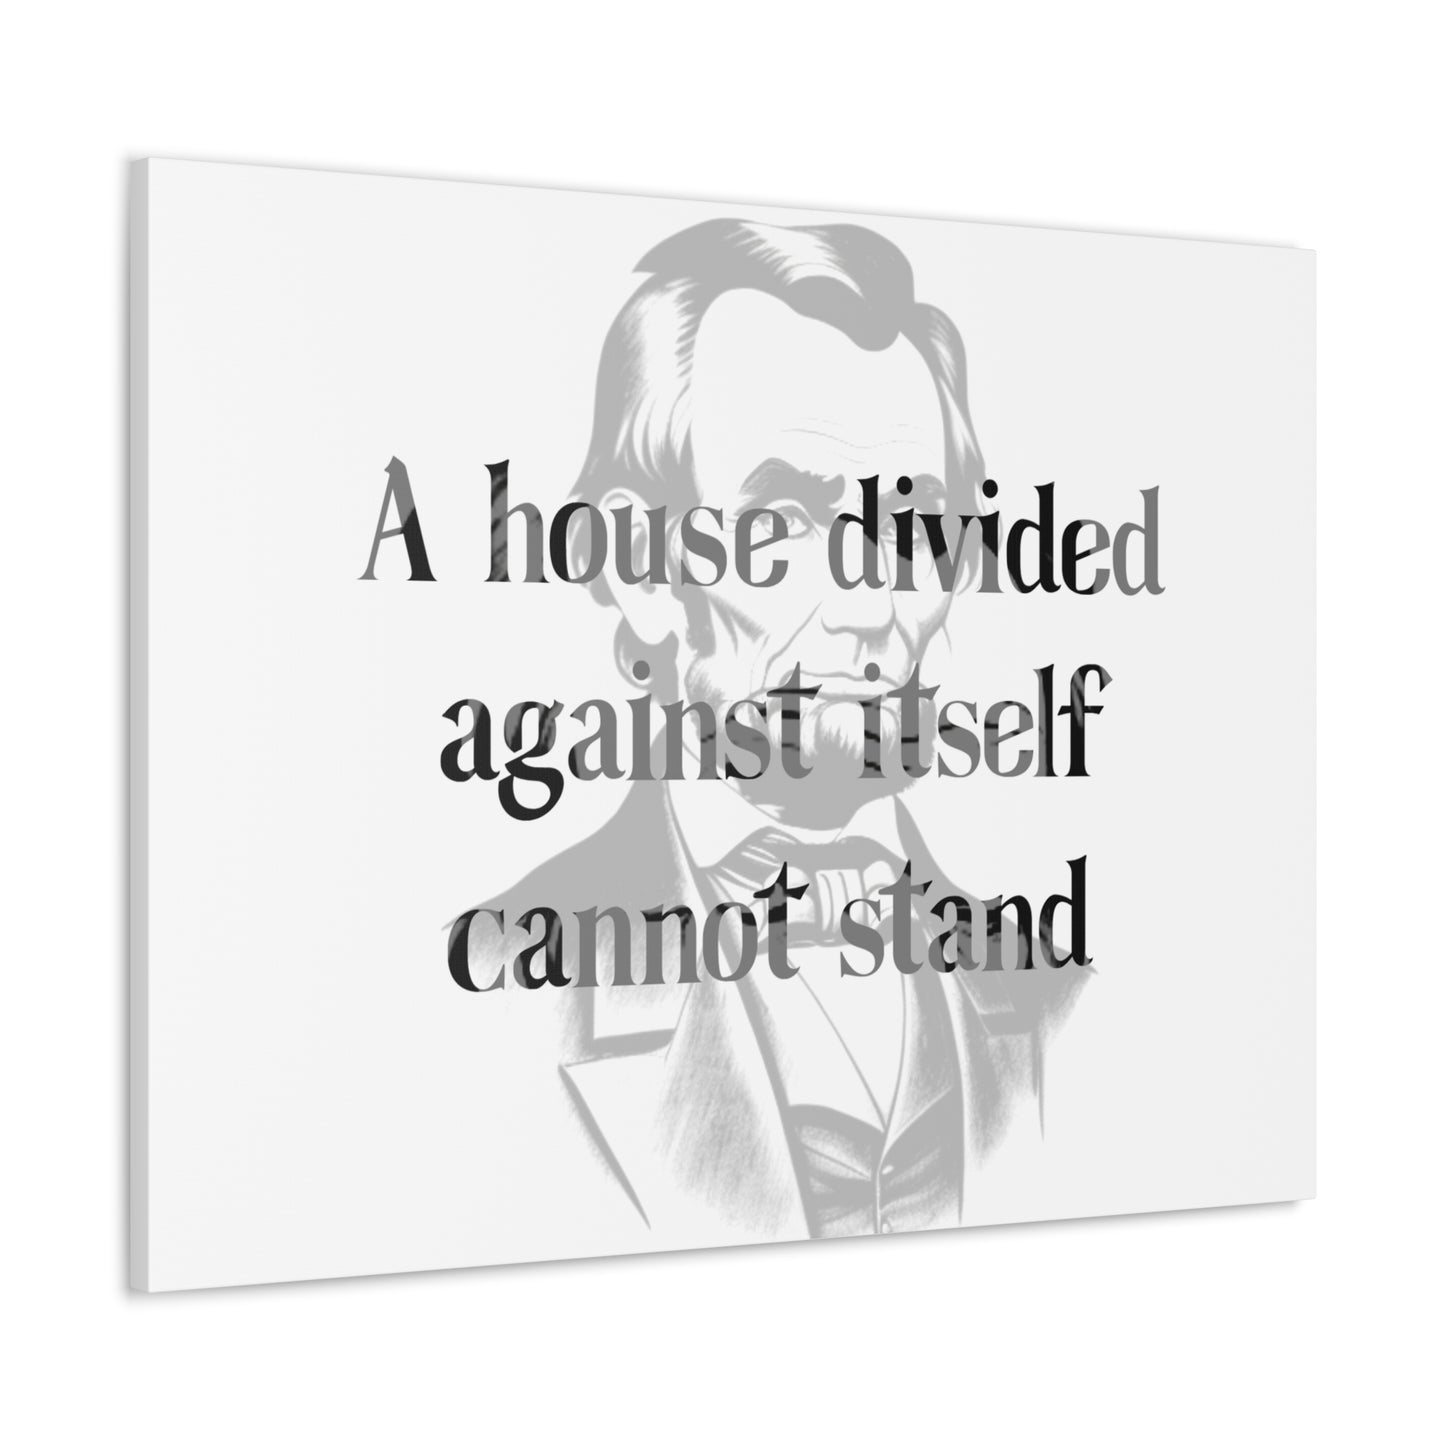 Abraham Lincoln Quote 6, AI Canvas Art, Horizontal Light Print, 16th President of the United States, American Patriots, AI Art, Political Art, Canvas Prints, Presidential Portraits, Presidential Quotes, Inspirational Quotes